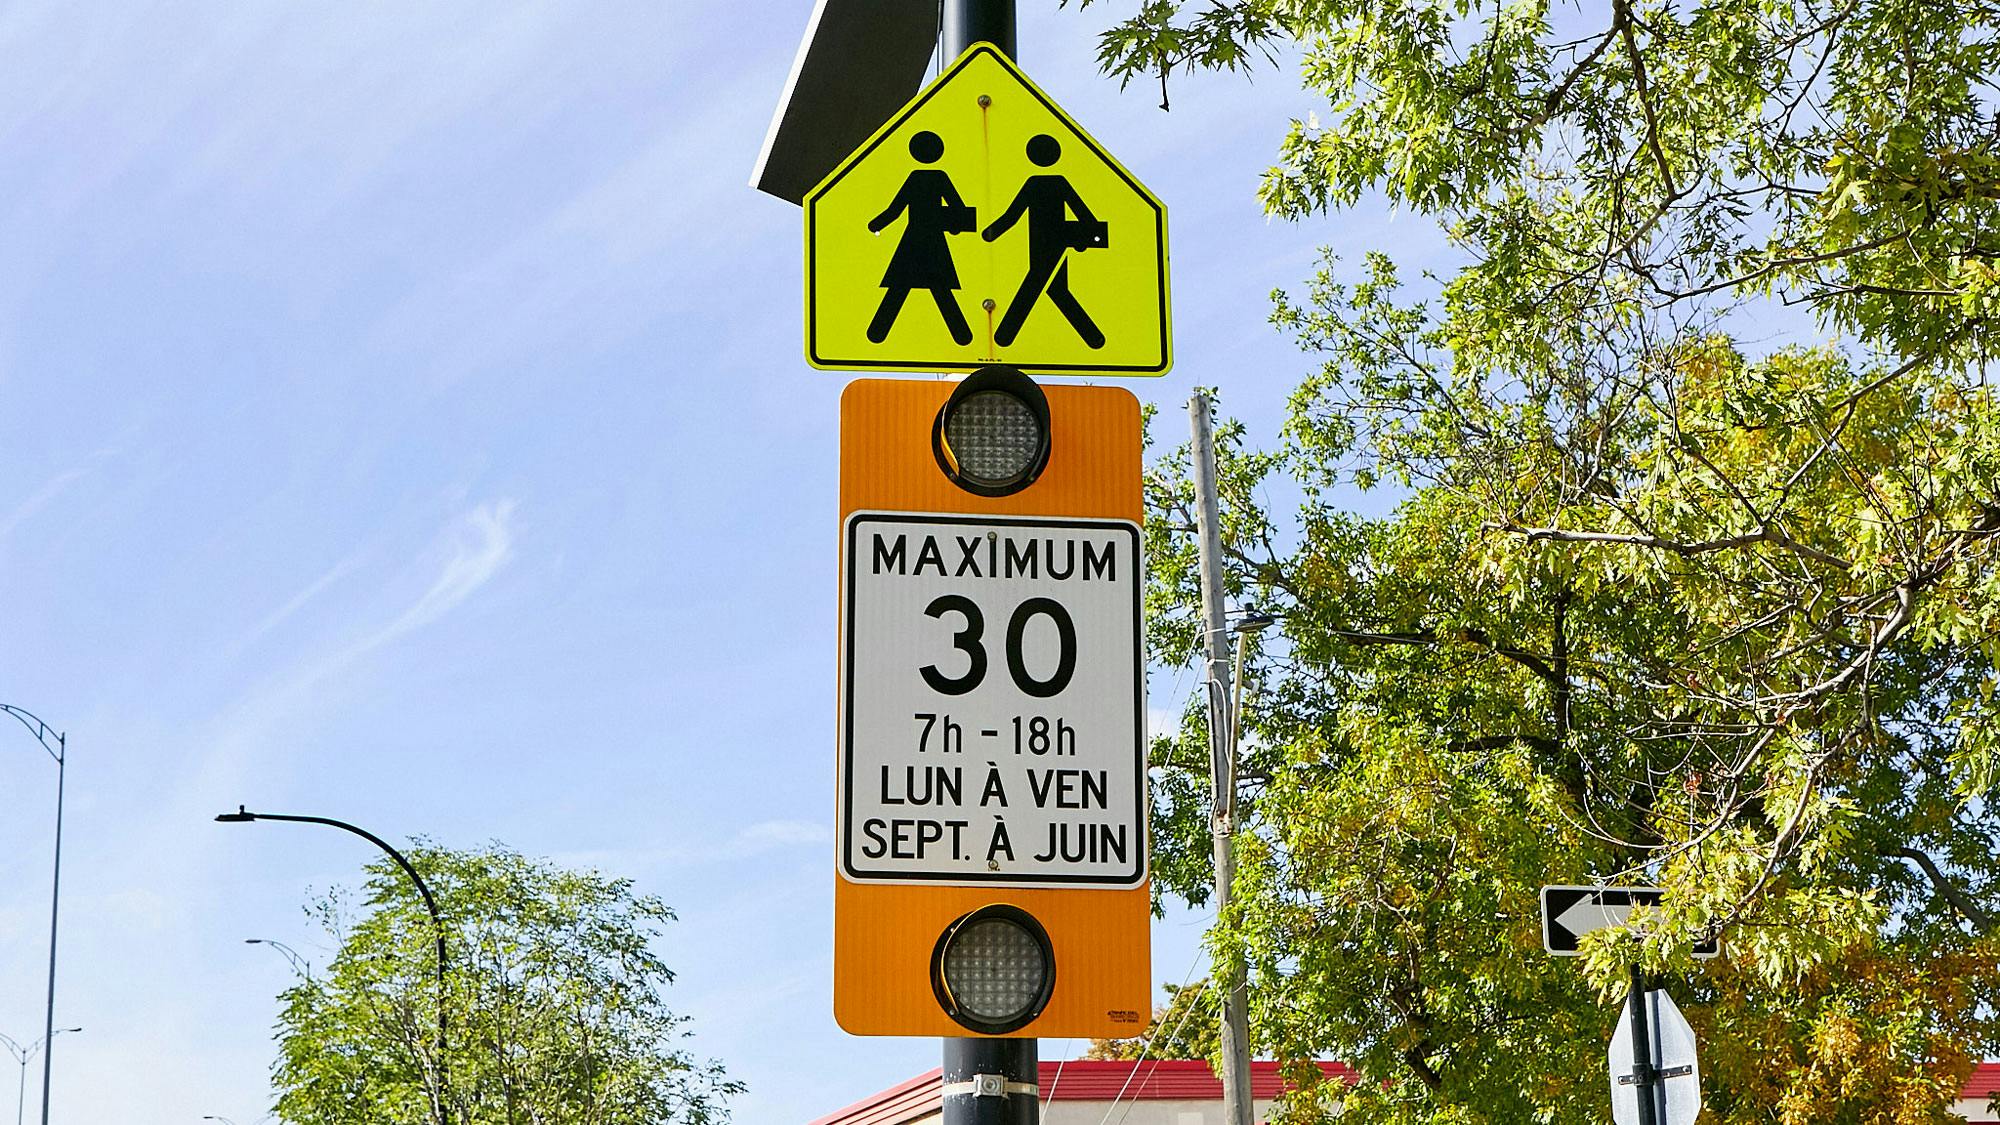 30 km/h school zone with flashing speed sign during school hours